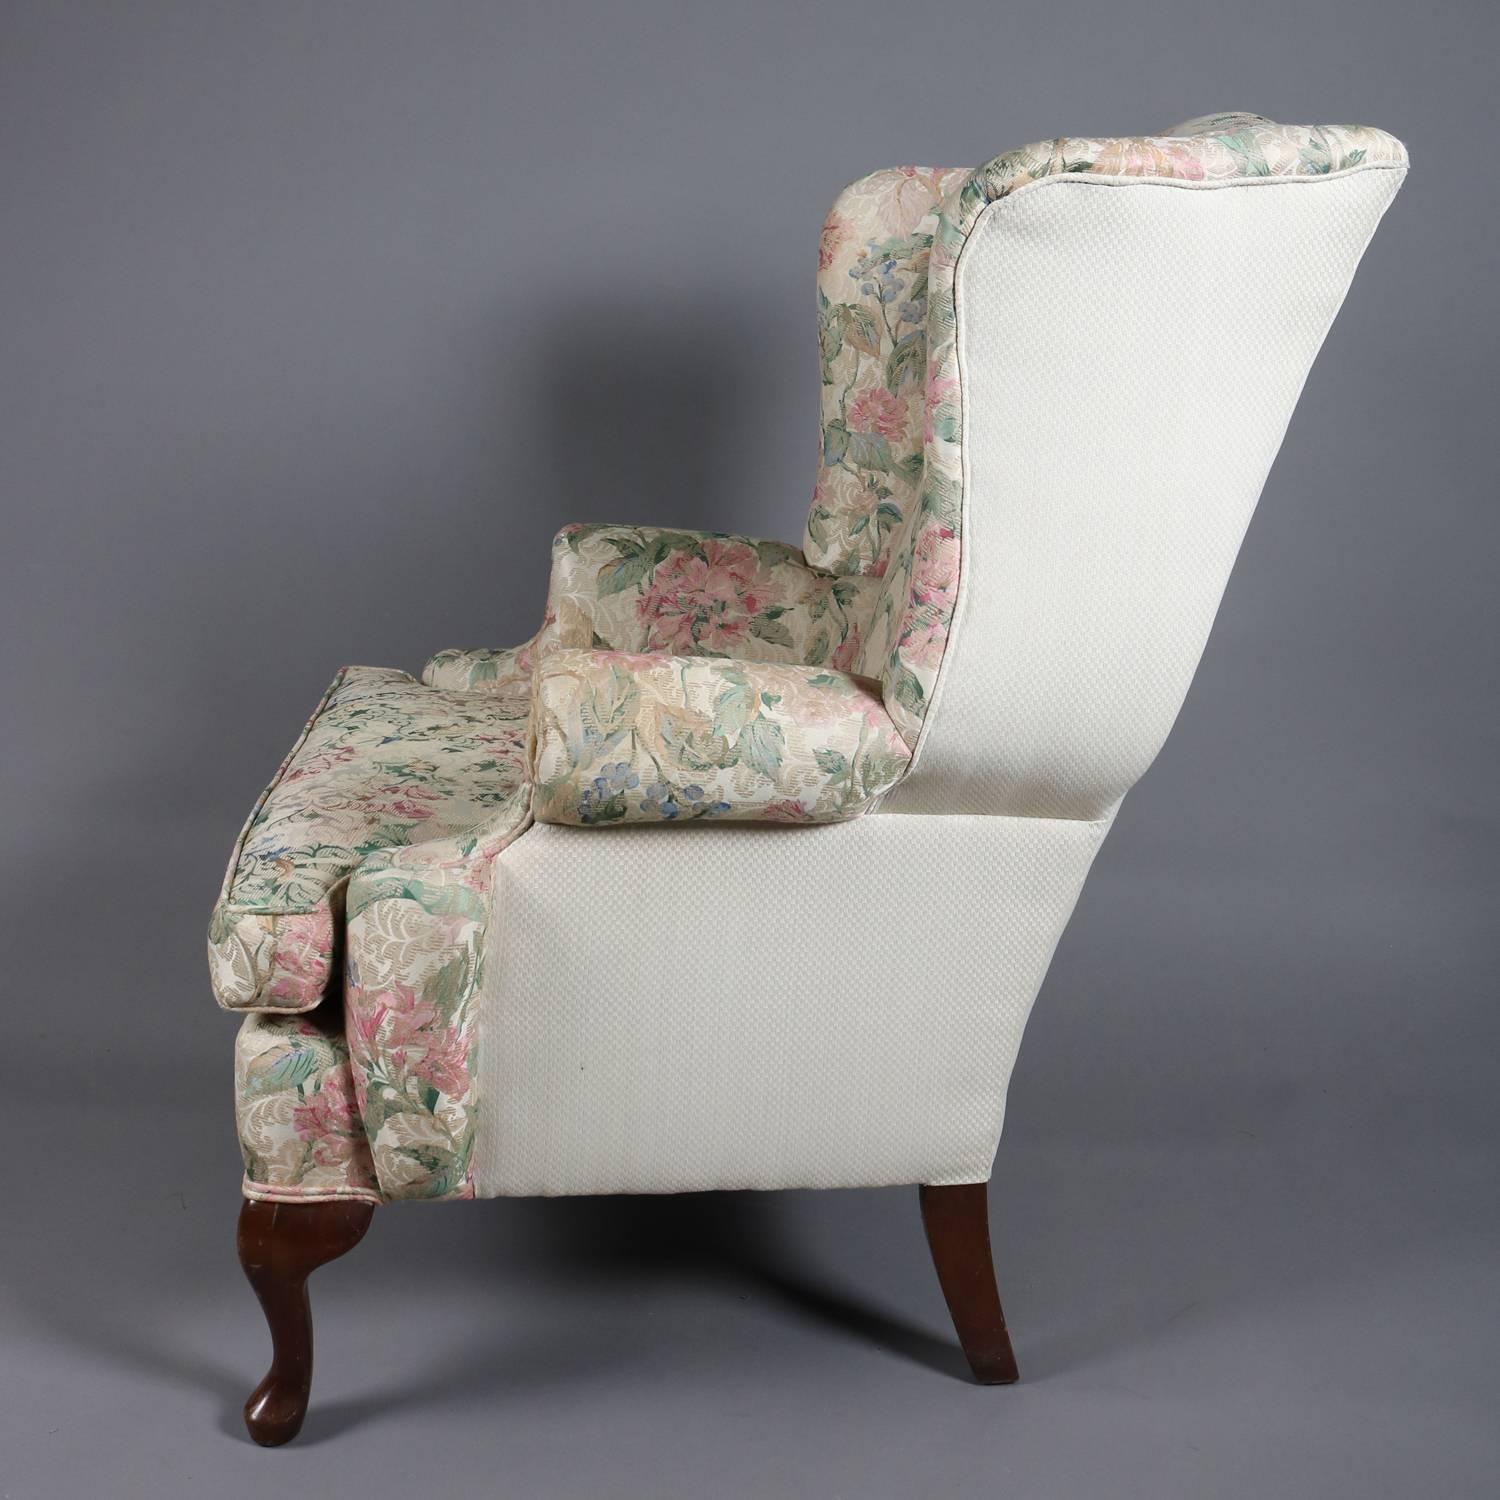 Upholstery Pair of Queen Anne Style Floral Upholstered Wingback Chairs, 20th Century